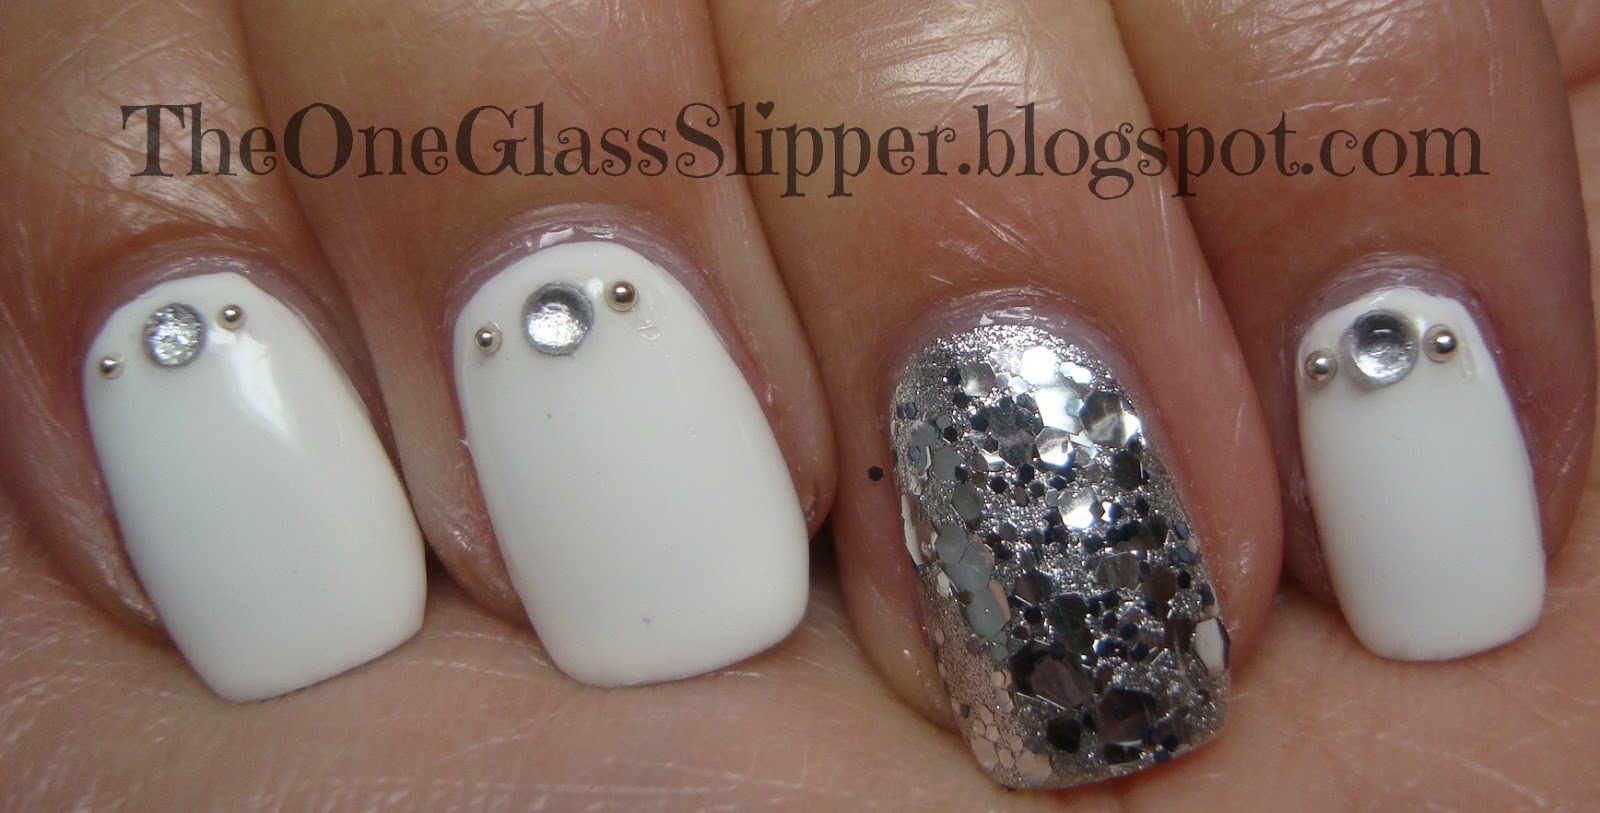 White and Silver Nail Art